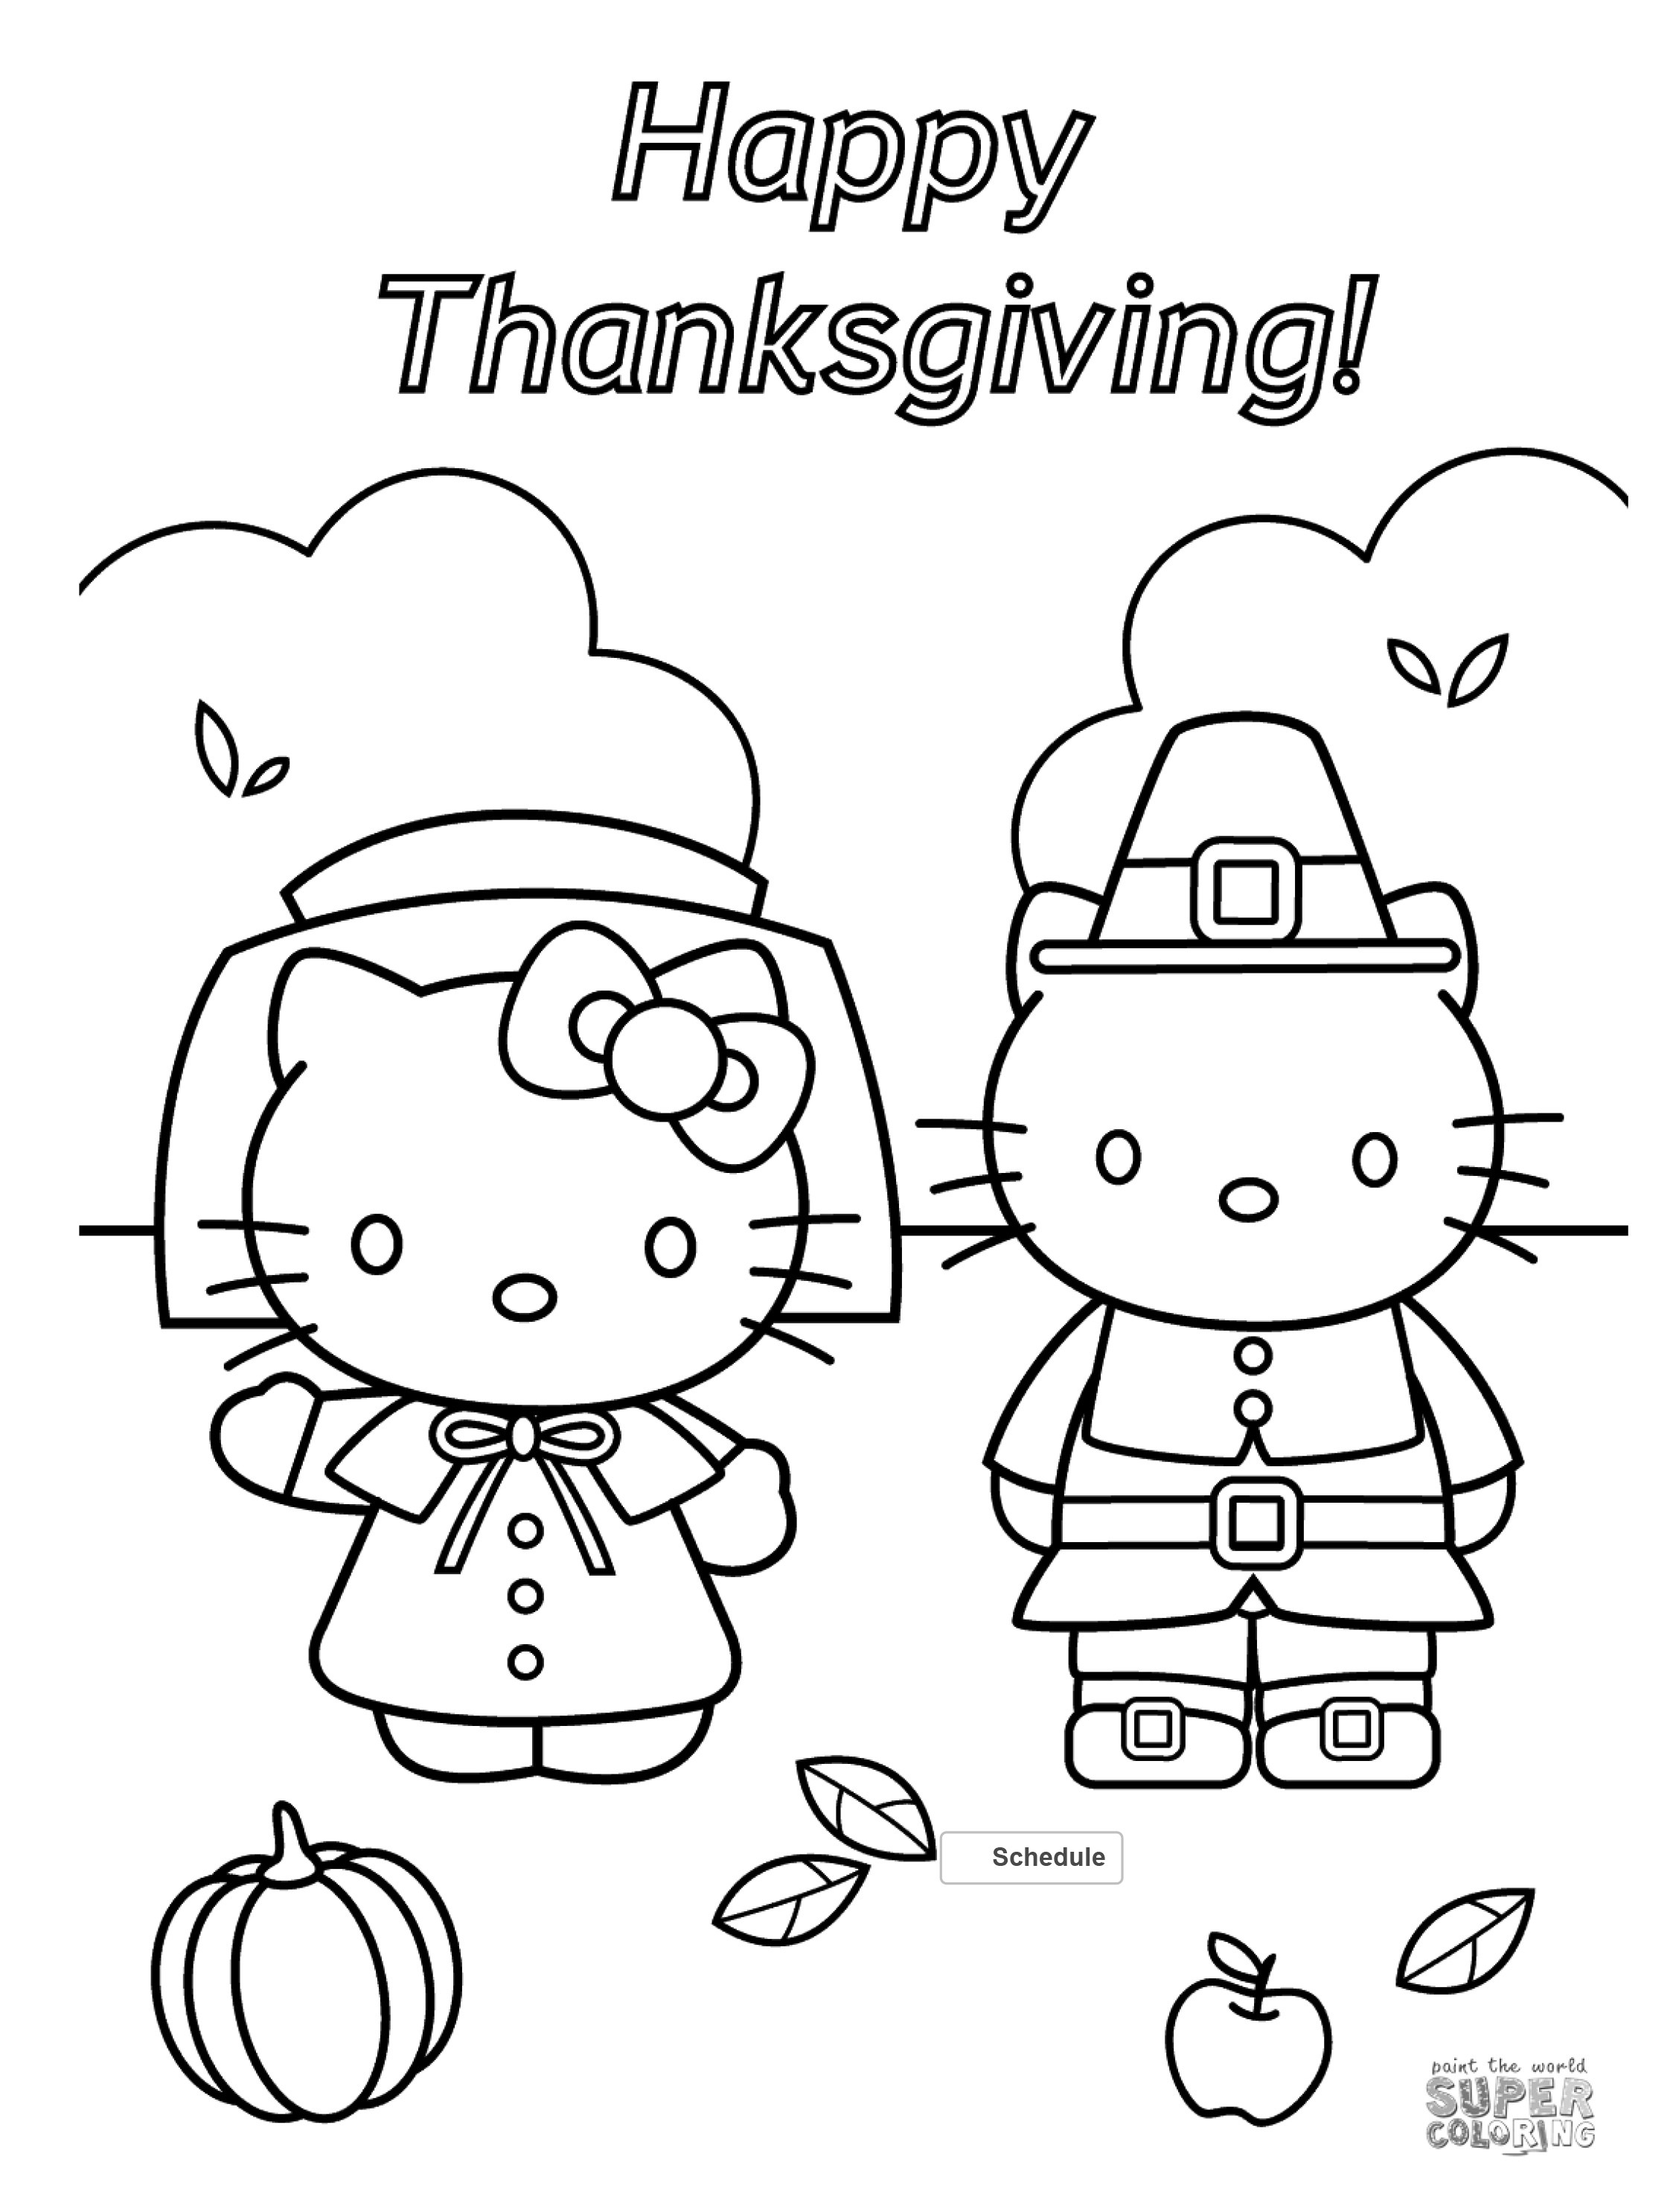 Thanksgiving Coloring Pages
 FREE Thanksgiving Coloring Pages for Adults & Kids